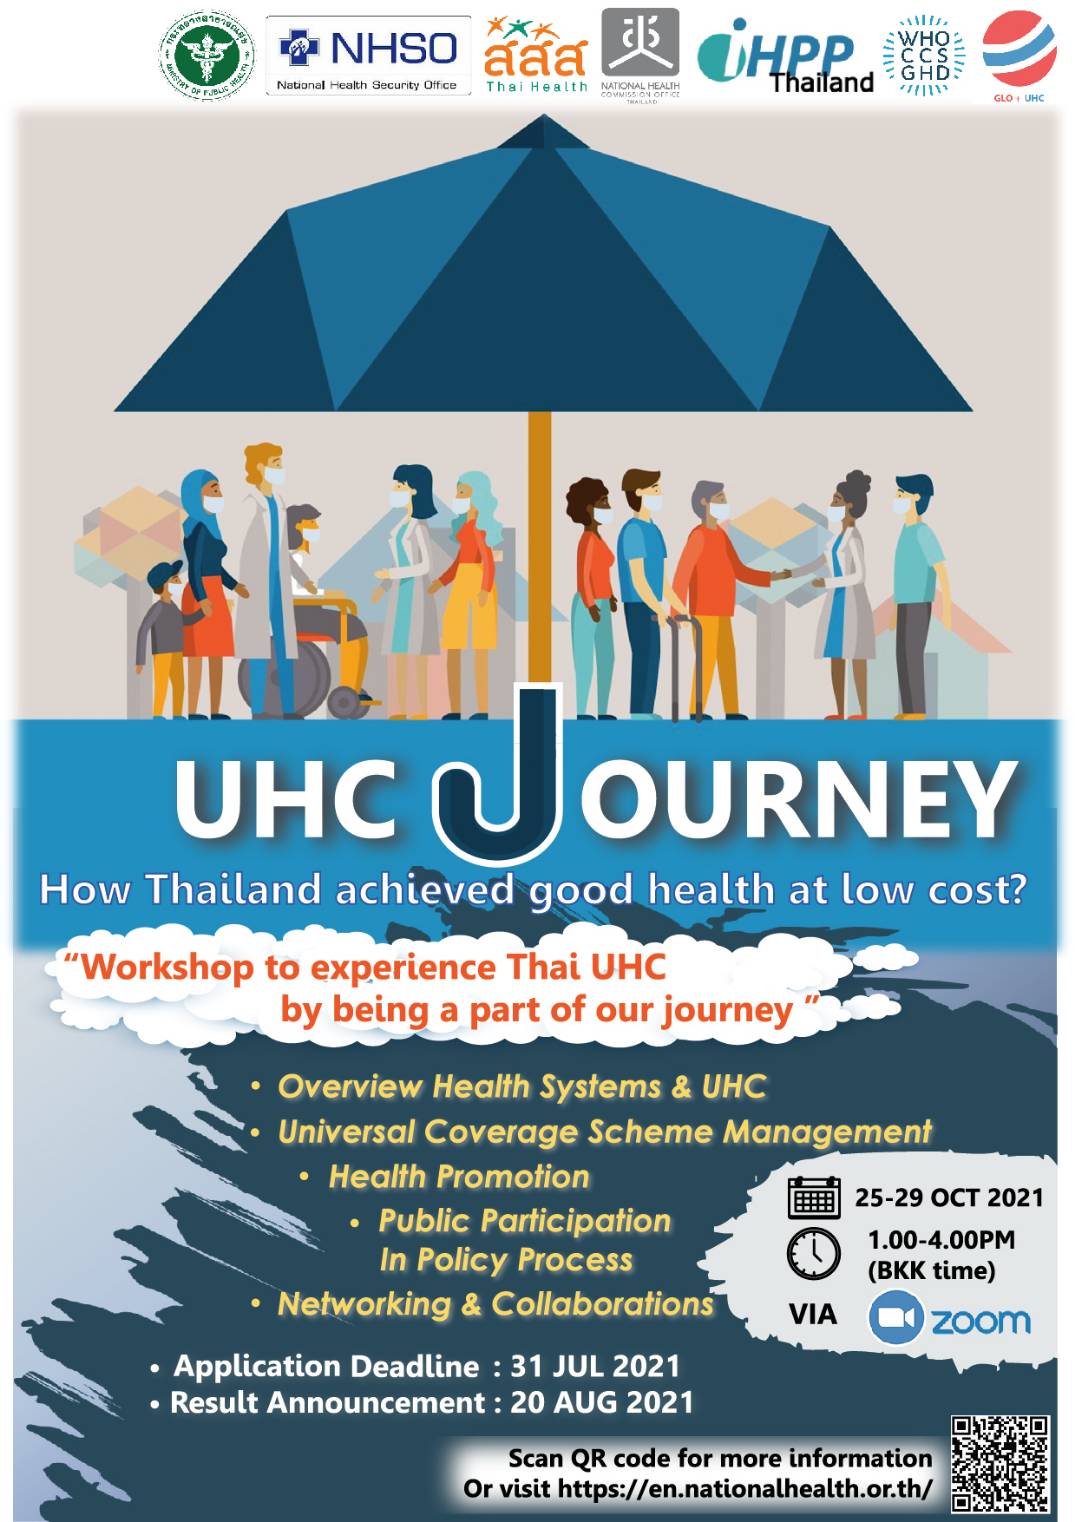 Online Workshop on Thai UHC Journey How Thailand Achieved Good Health at Low Cost?  October 25-29, 2021, Via Zoom Program